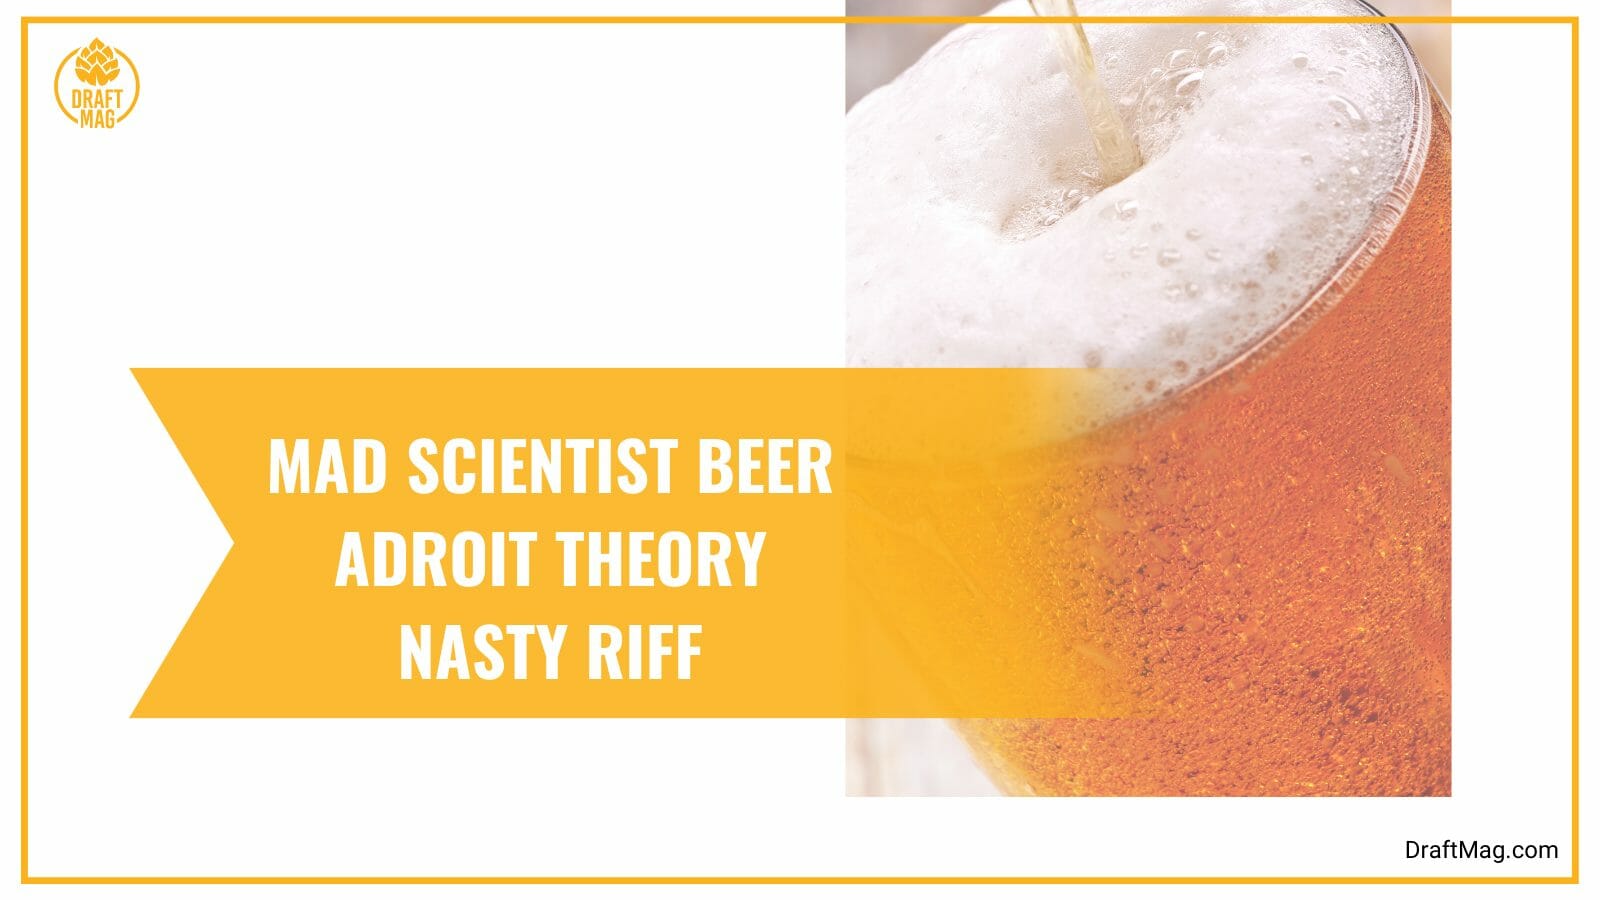 Mad scientist beer adroit theory nasty riff with chocolate